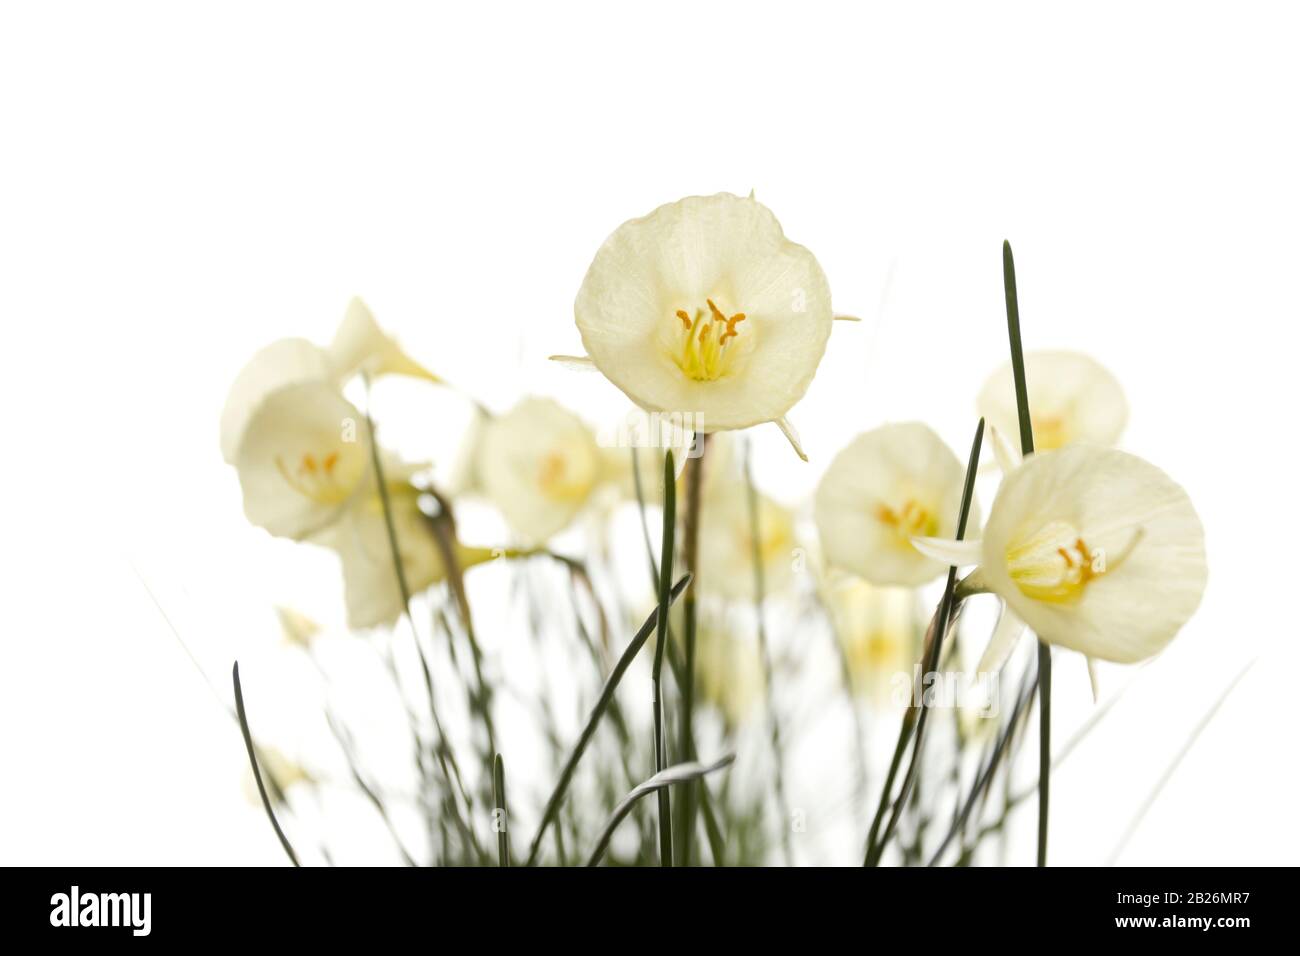 Arctic bell flowering daffodils on white background Stock Photo